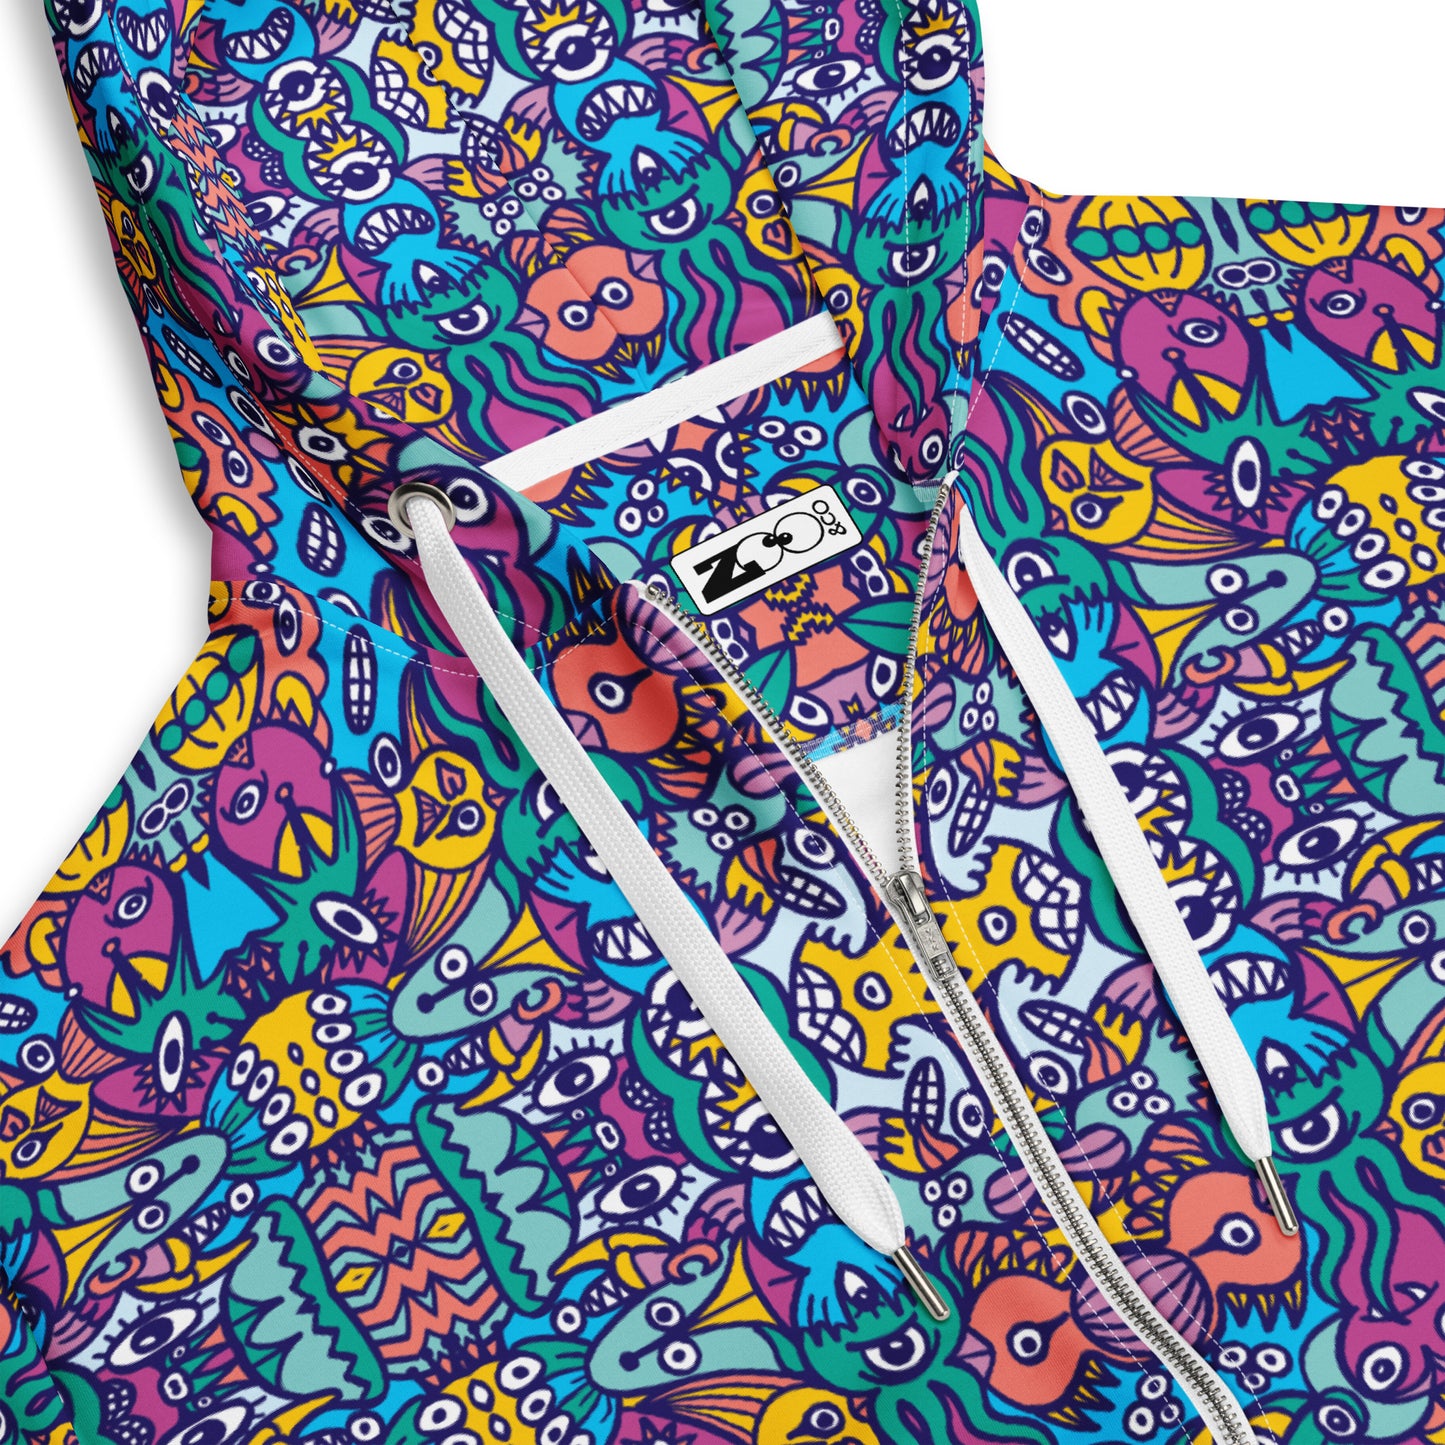 Whimsical pattern full of multicolor alien critters - Unisex zip hoodie. Product details